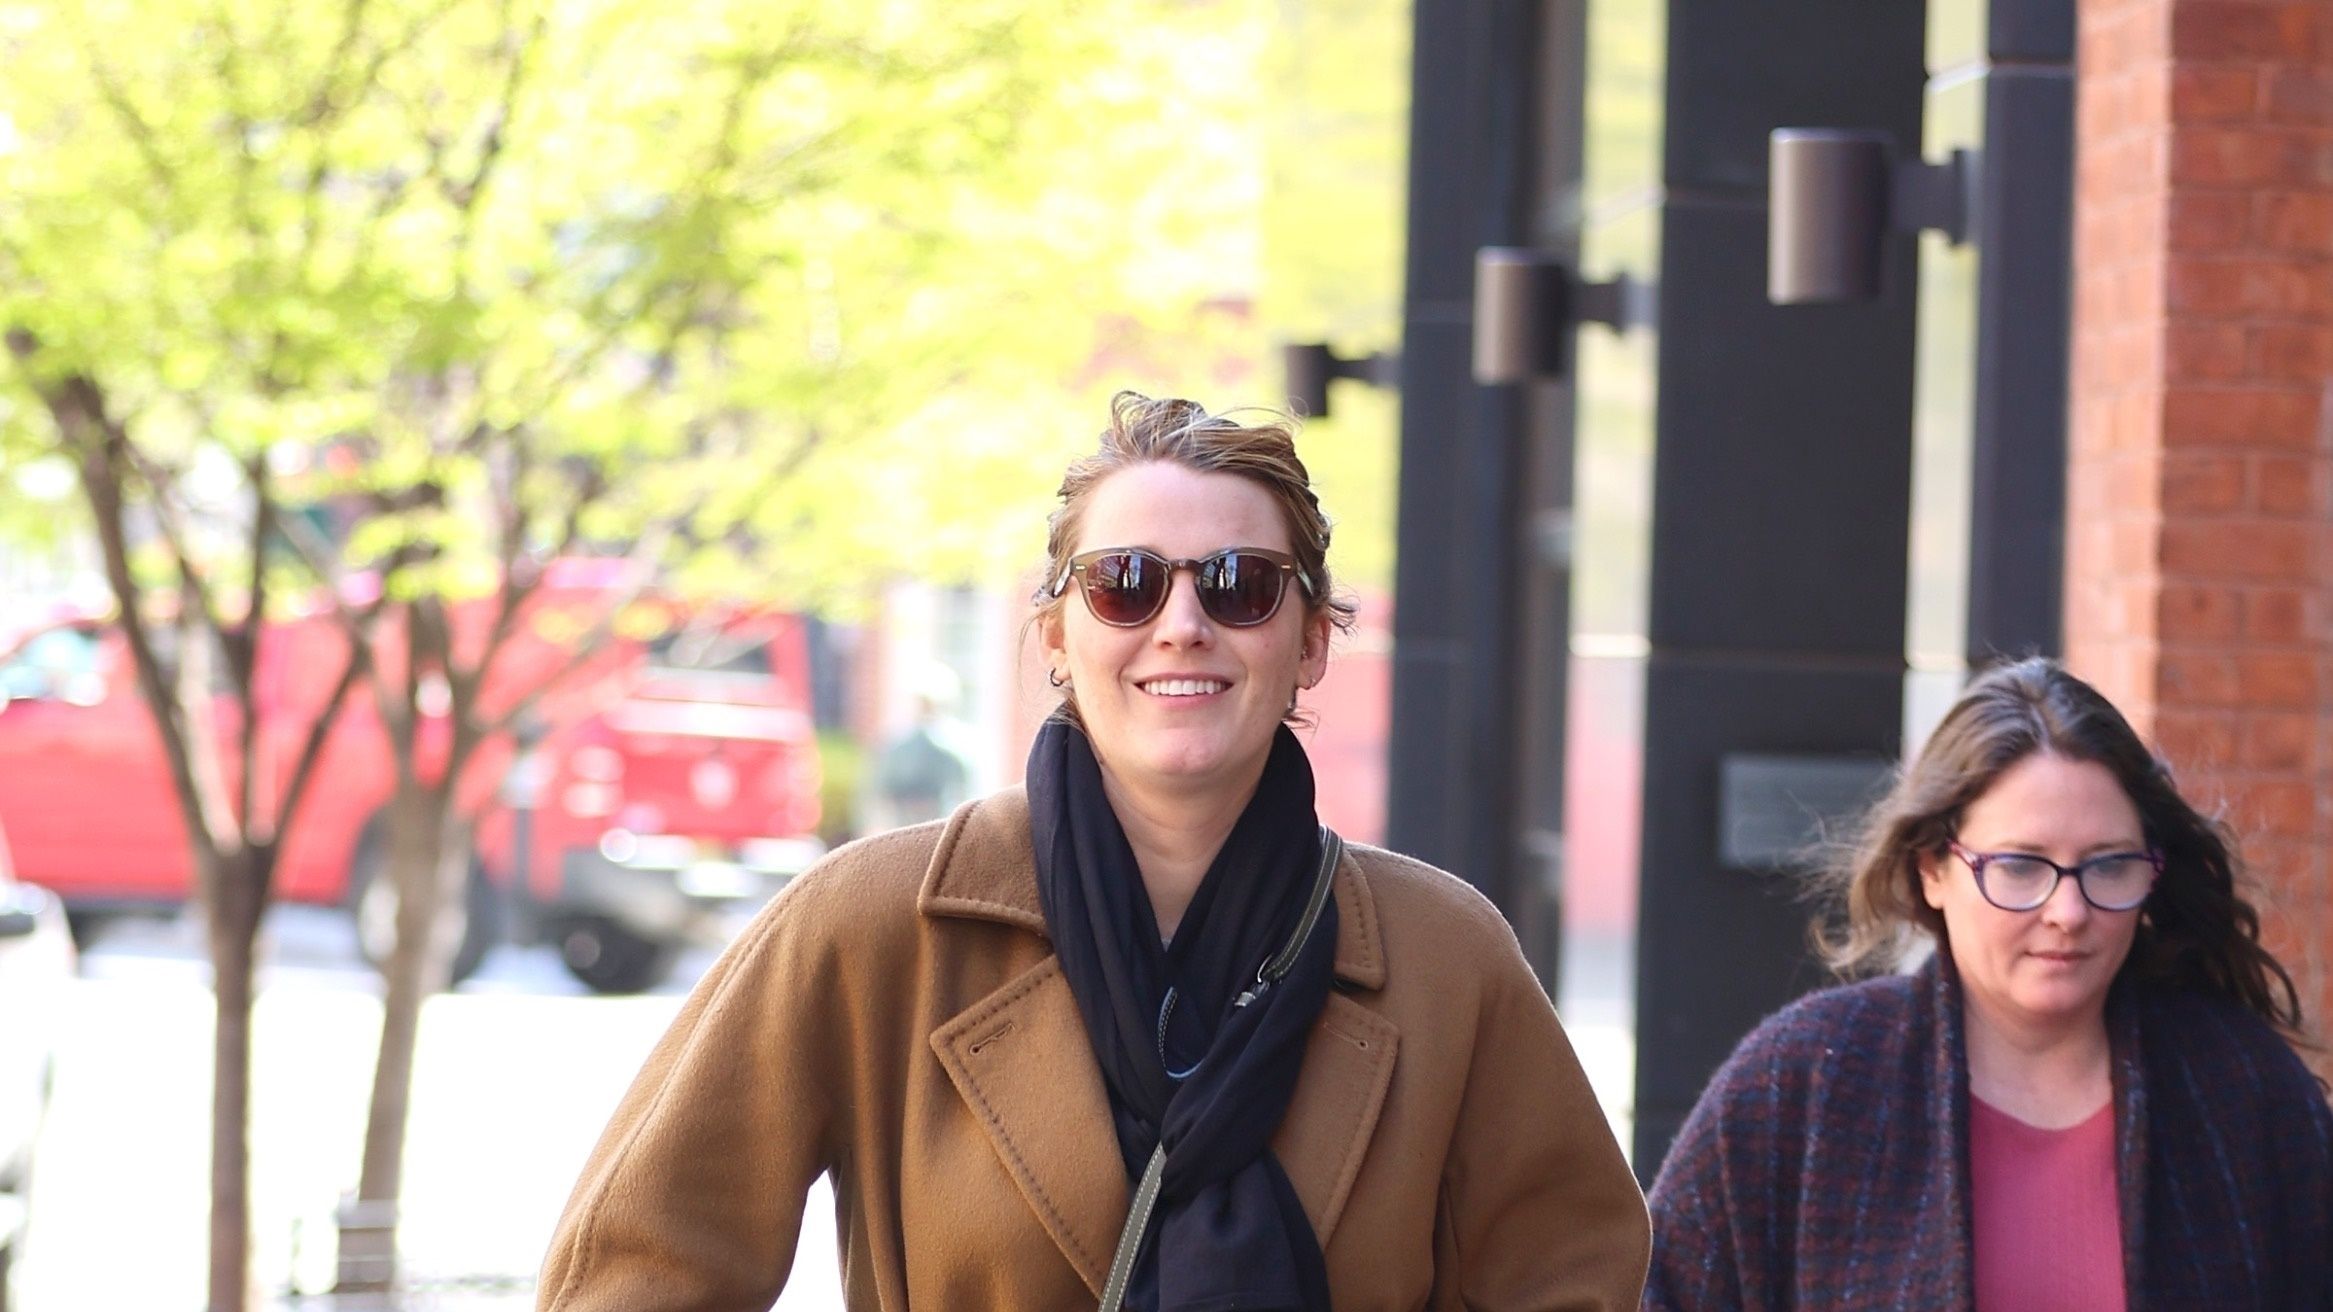 Blake Lively's Phone Crossbody Is a Travel Must